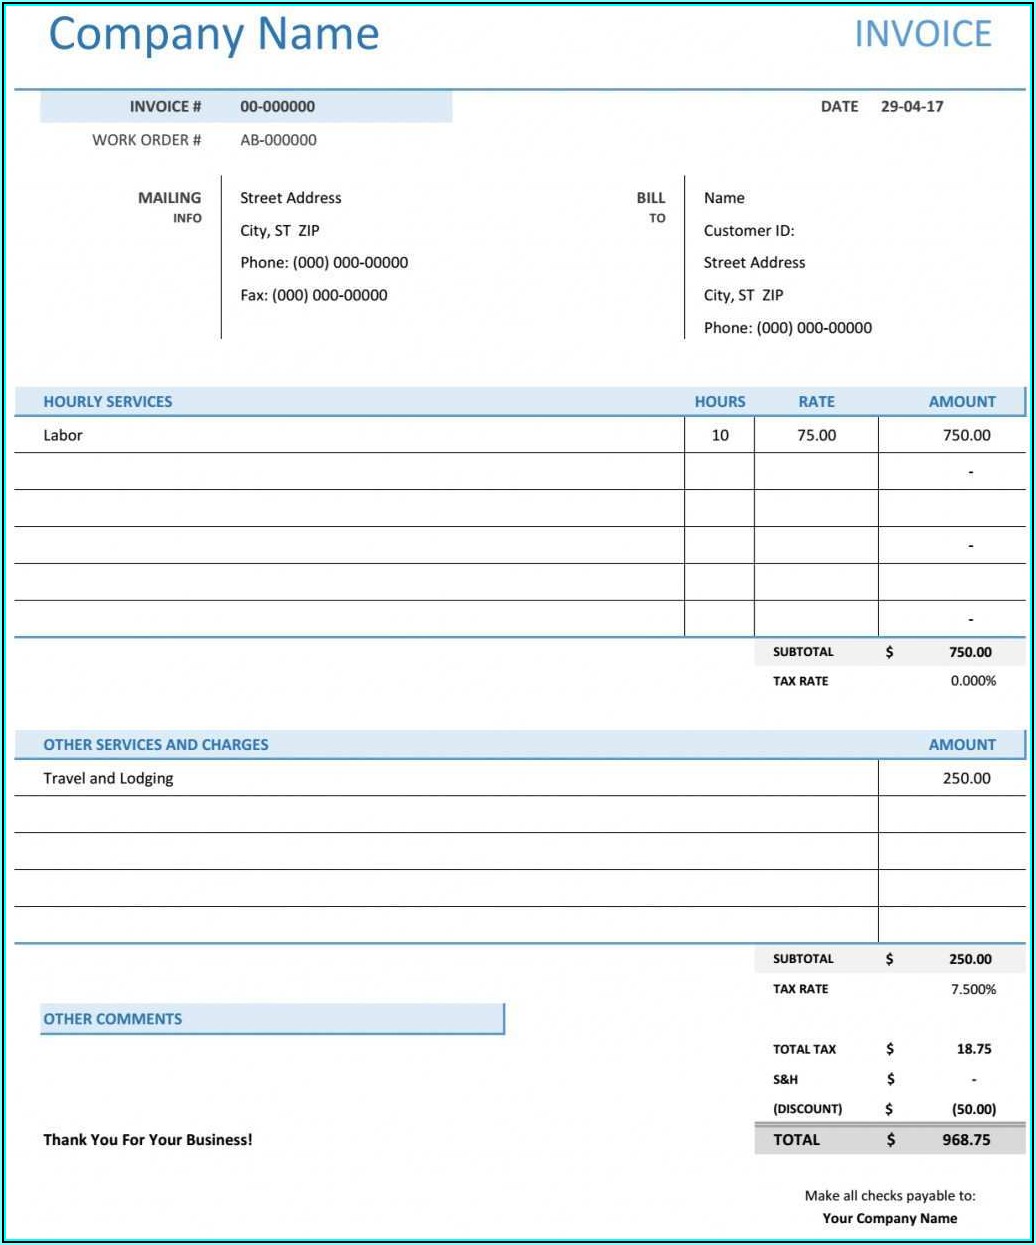 Consulting Invoice Template Ontario